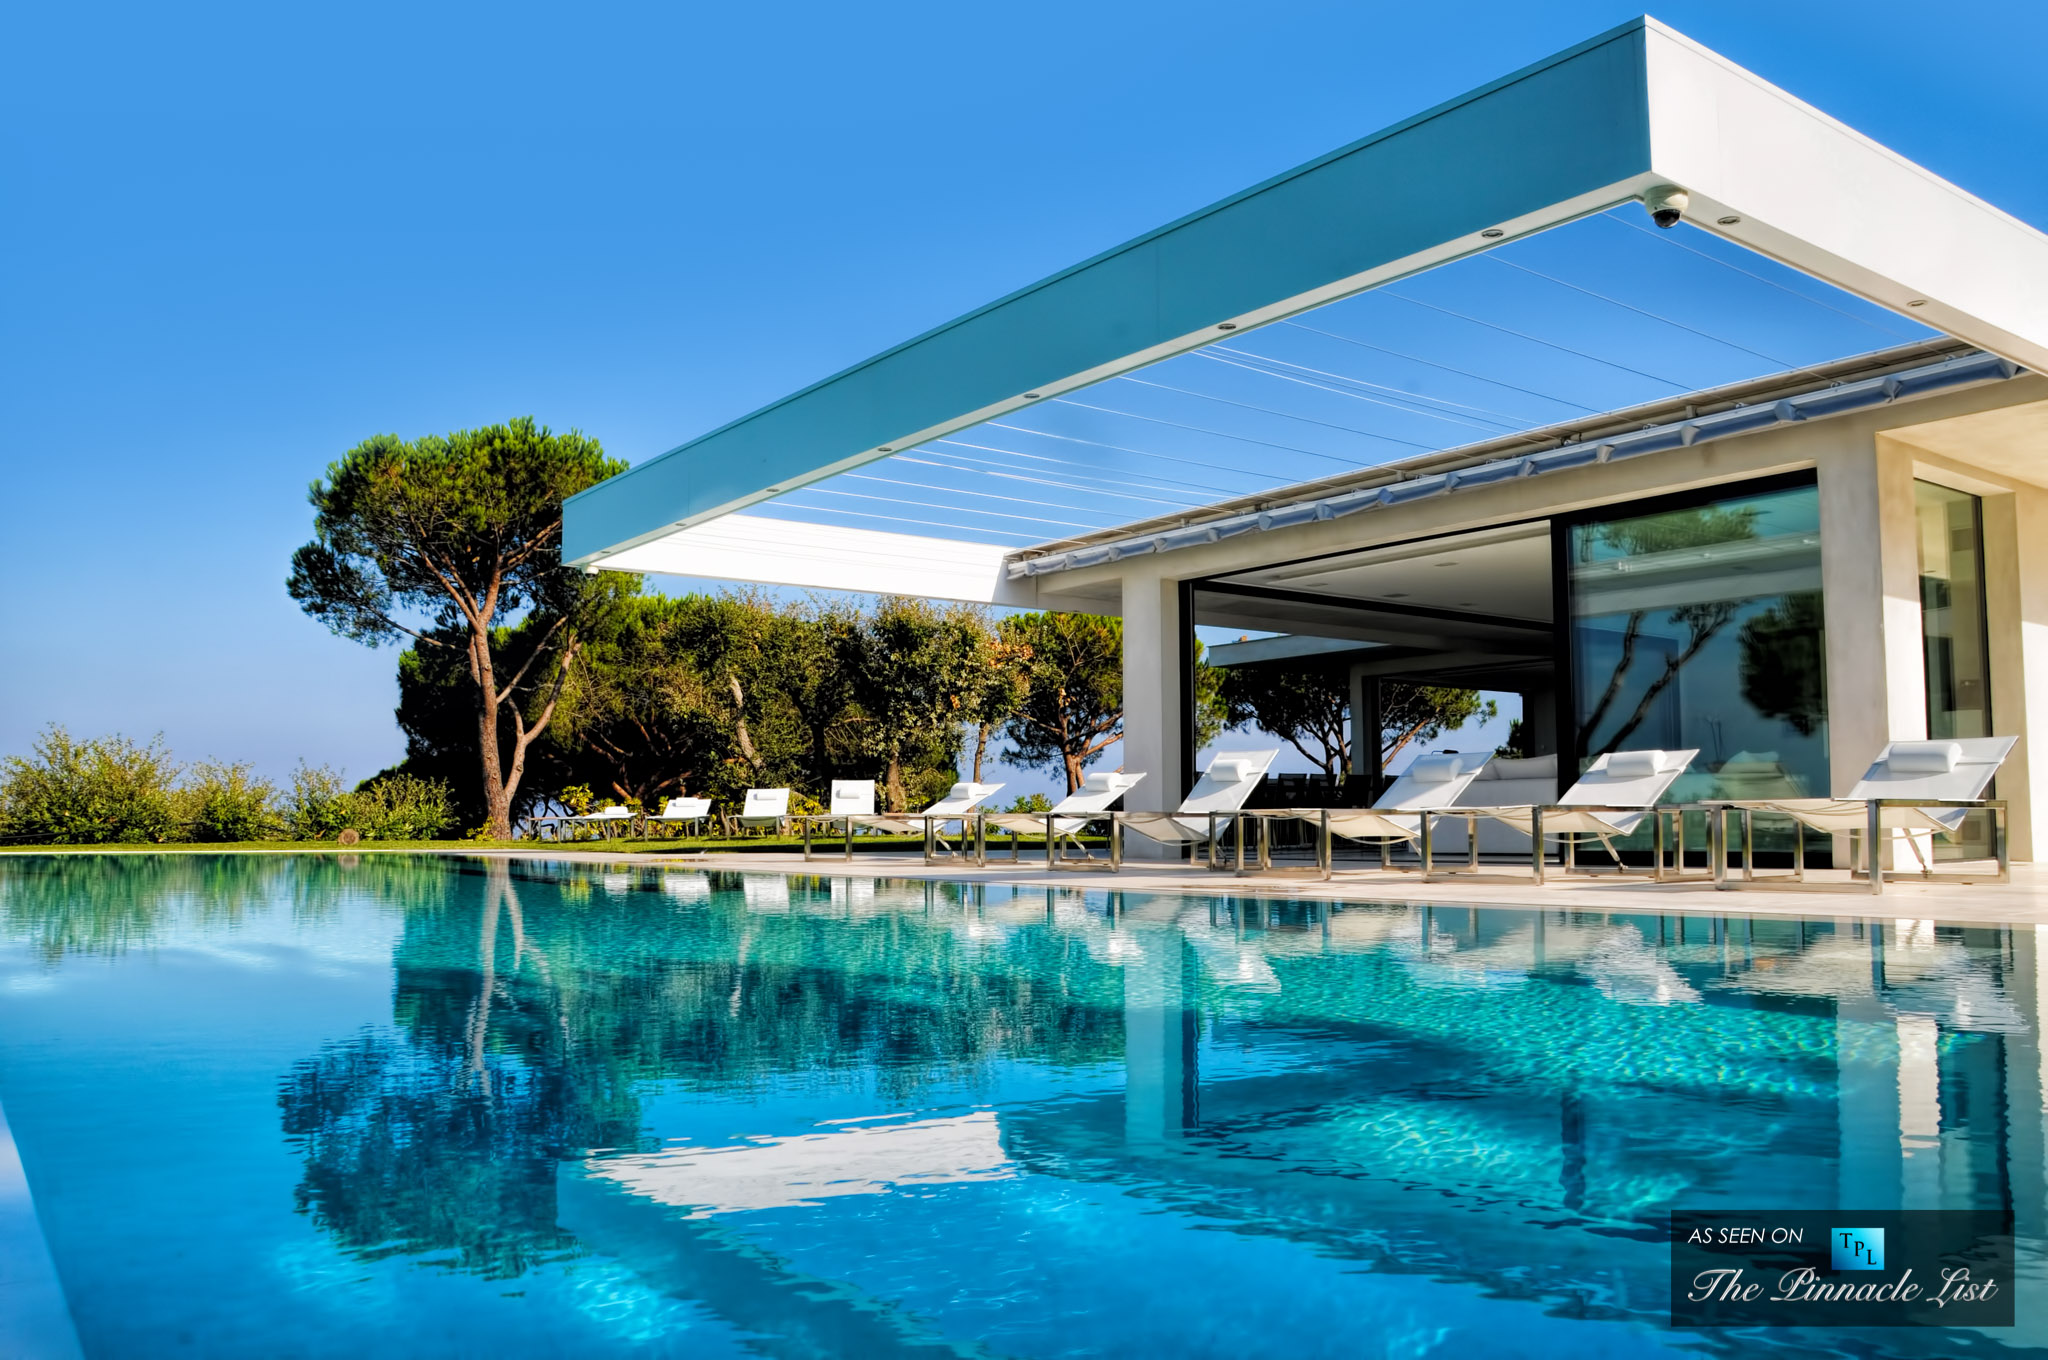 Villa Paradise in St. Tropez - Rent a Family Villa on the French Riviera like No Other